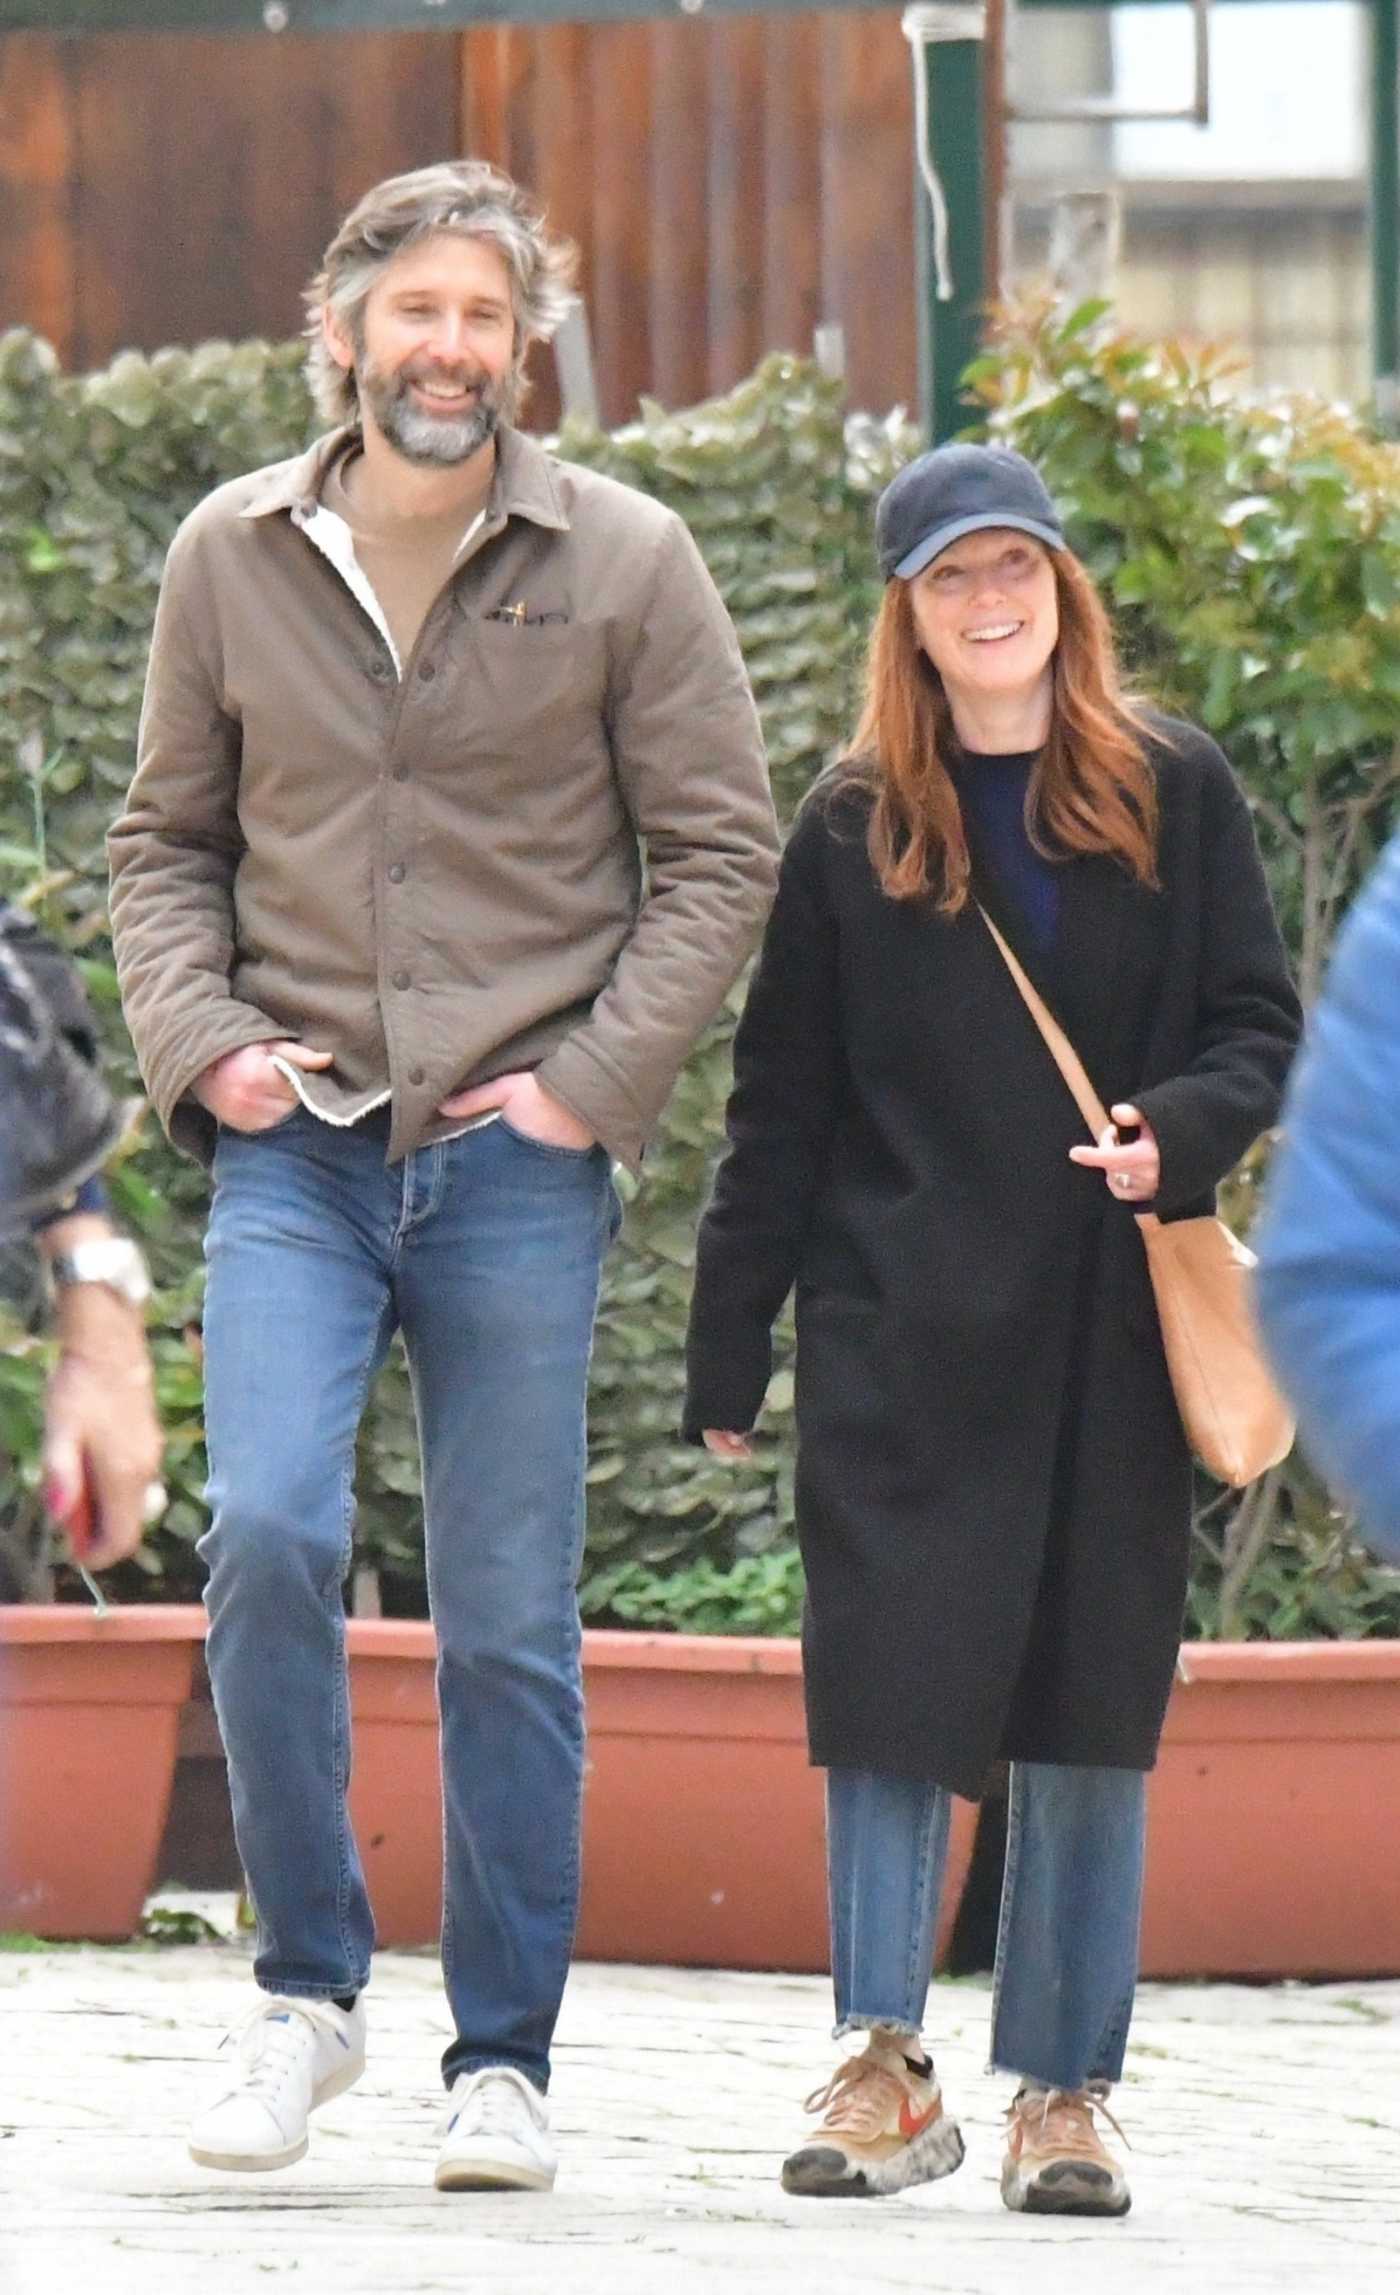 Julianne Moore in a Black Cap Was Seen Out with Her Husband Bart Freundlich in Venice 04/19/2022